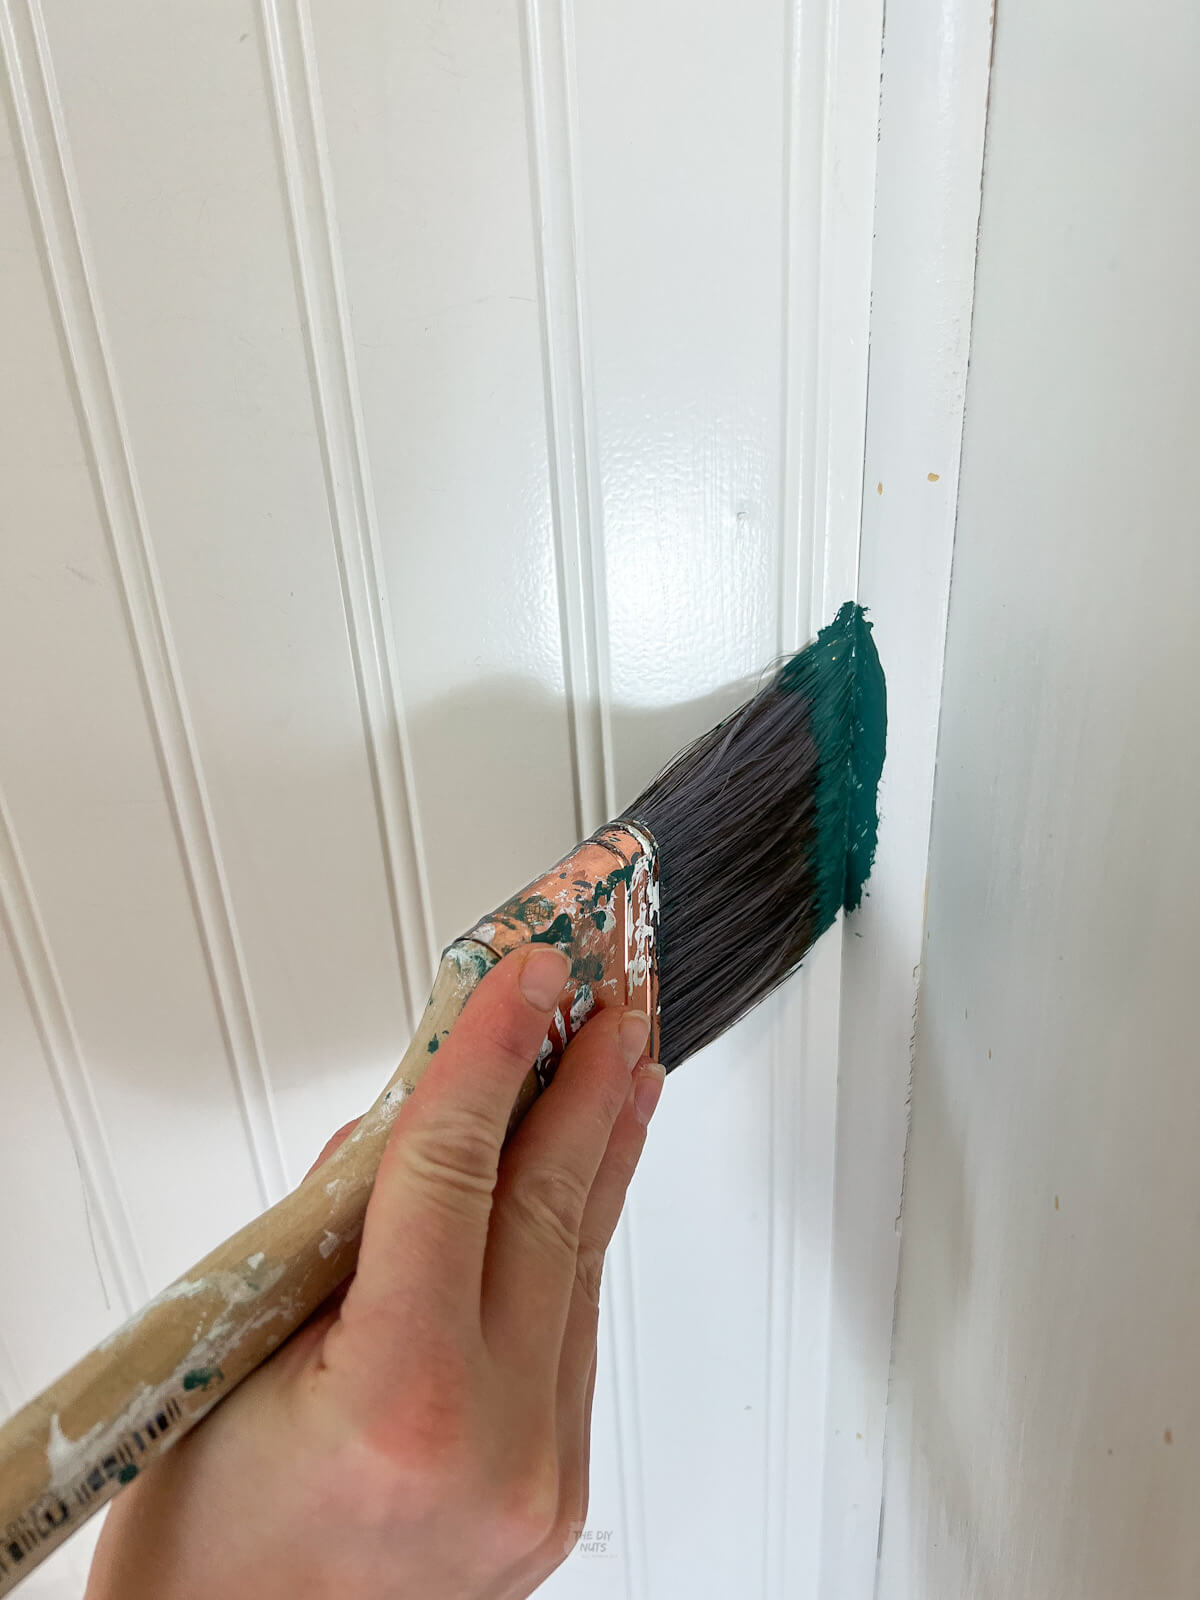 2.5" synthetic brush with green paint painting small areas of closet cubby.